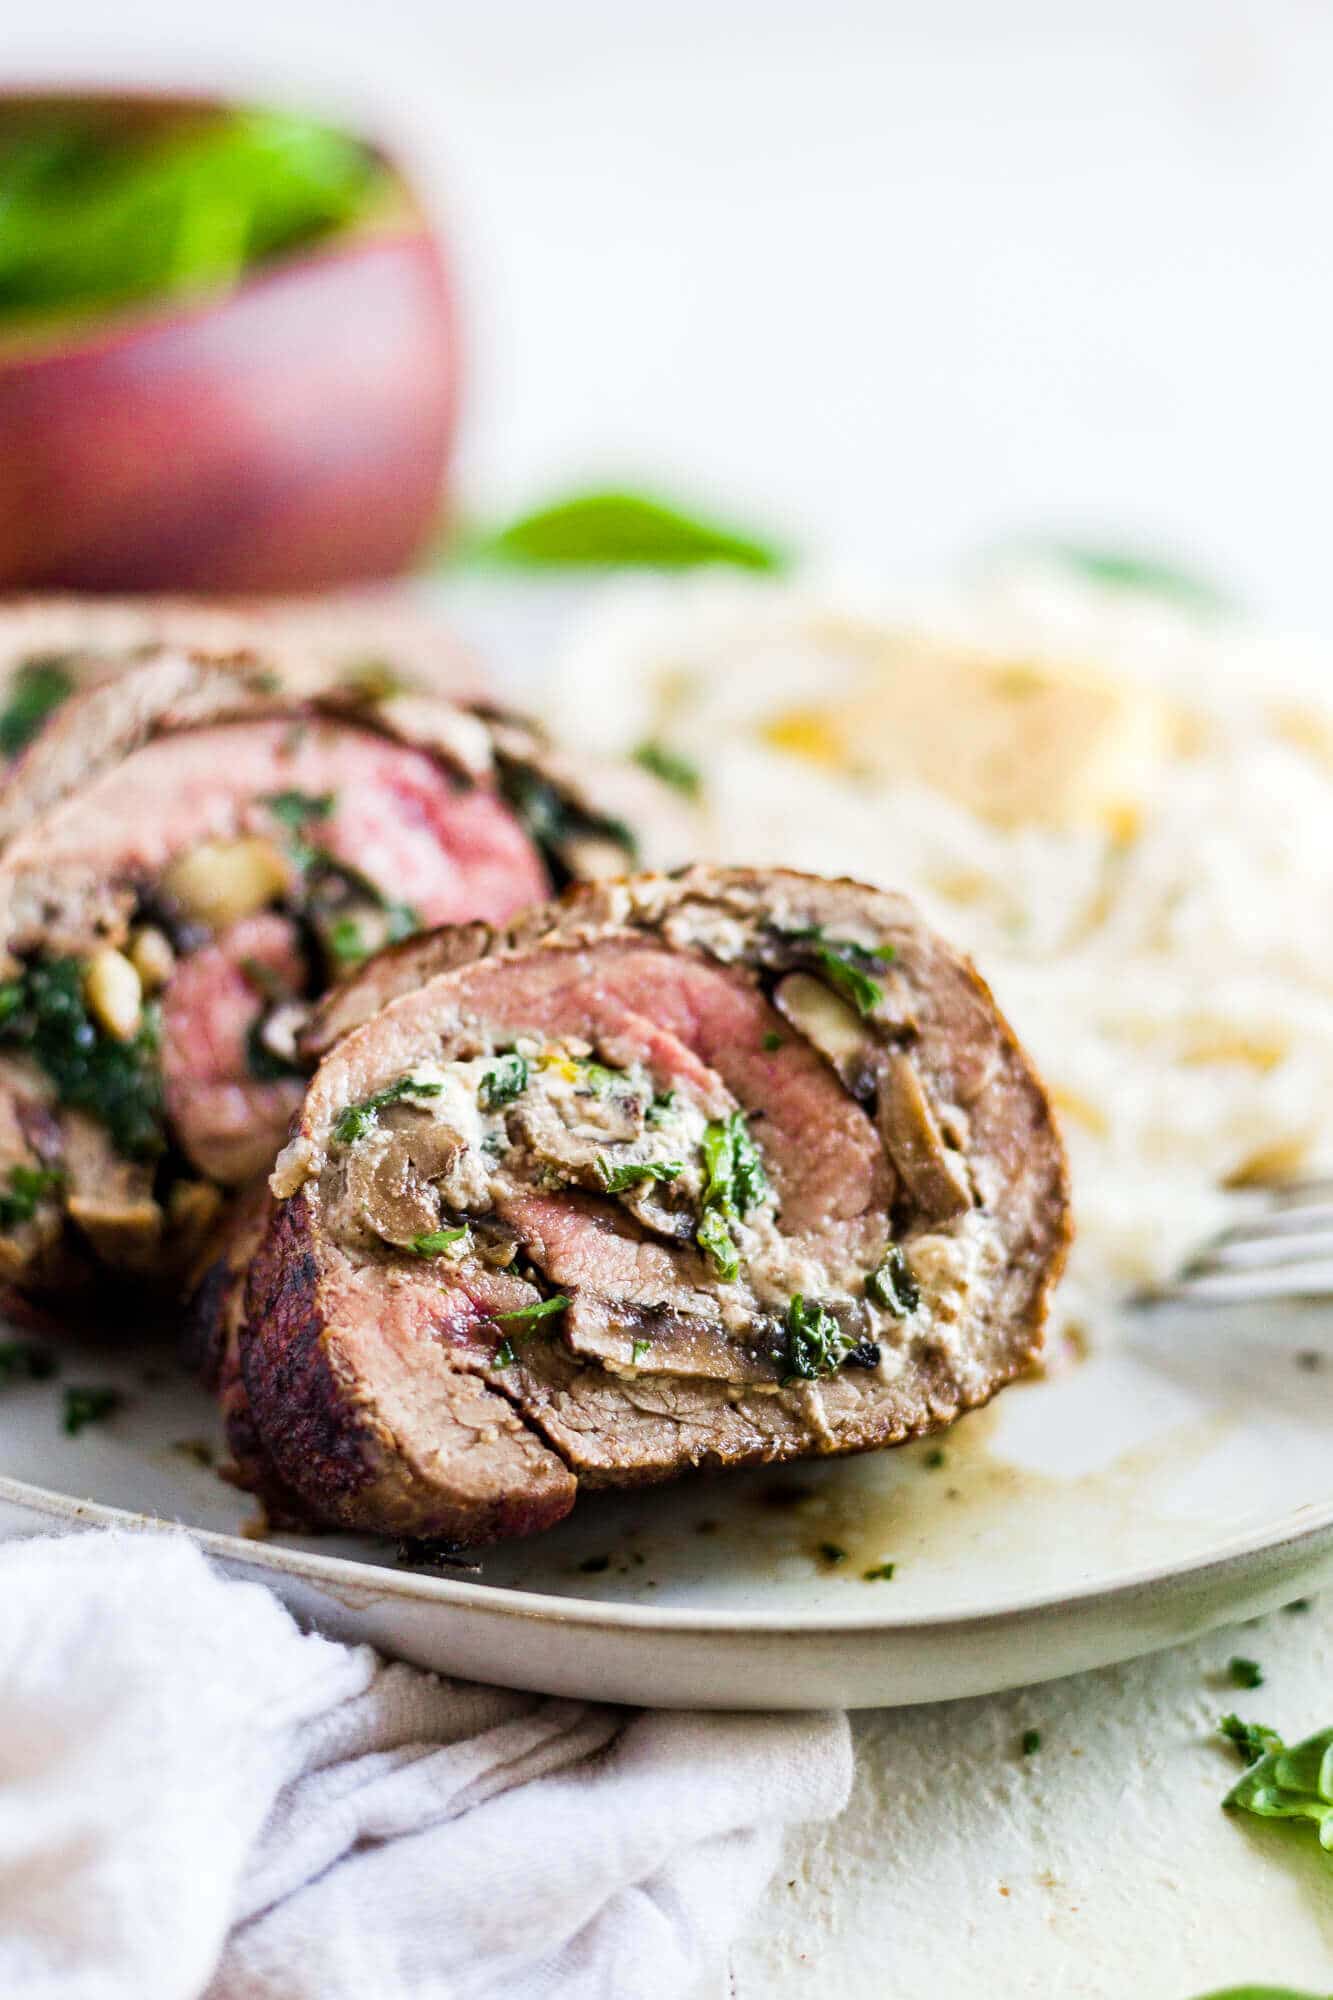 stuffed flank steak rolled with spinach, mushroom and goat cheese on a dinner plate with mashed potatoes